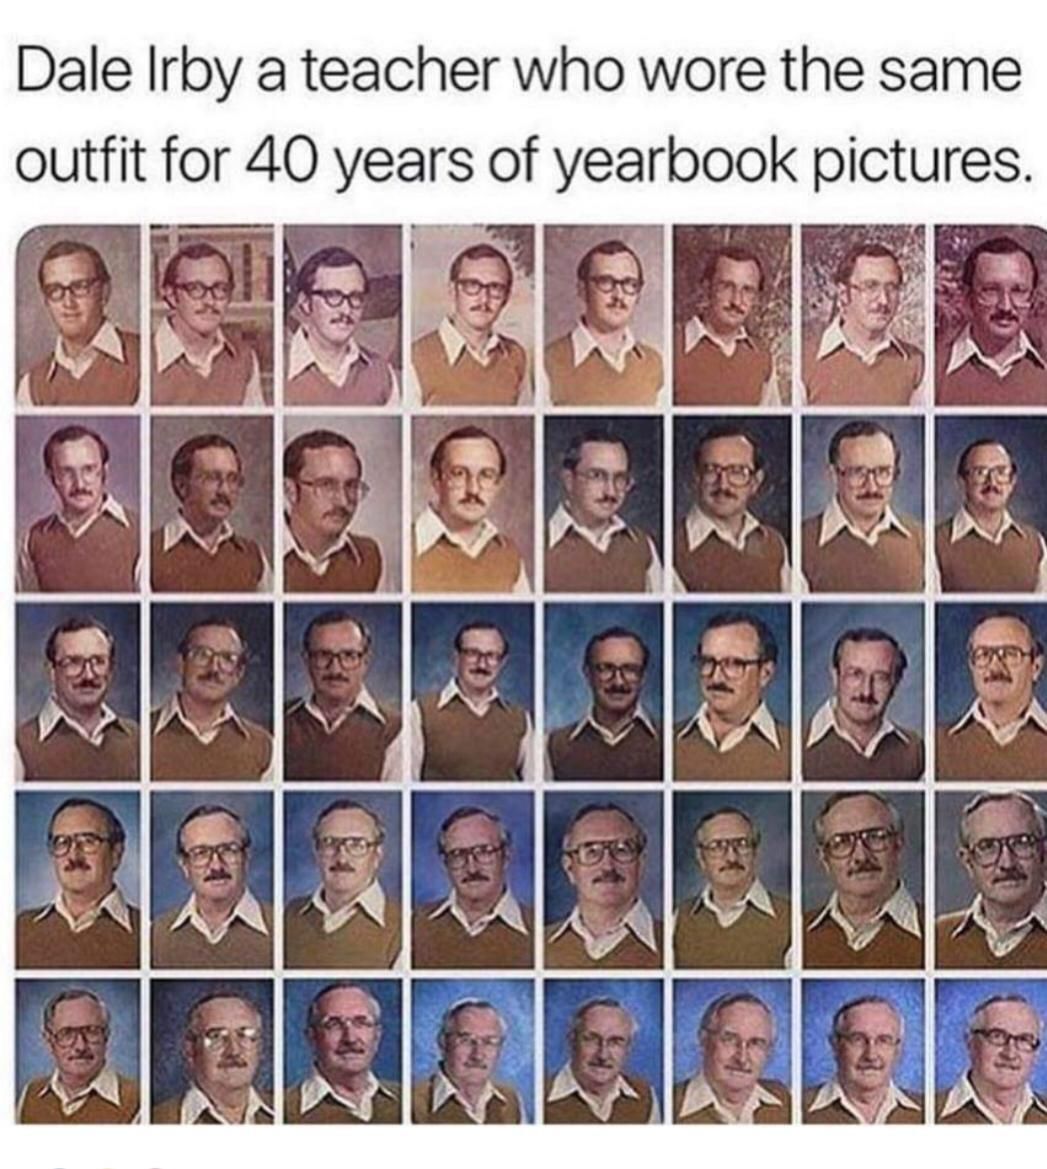 This teacher had the same shirt for 40 yearbook pictures